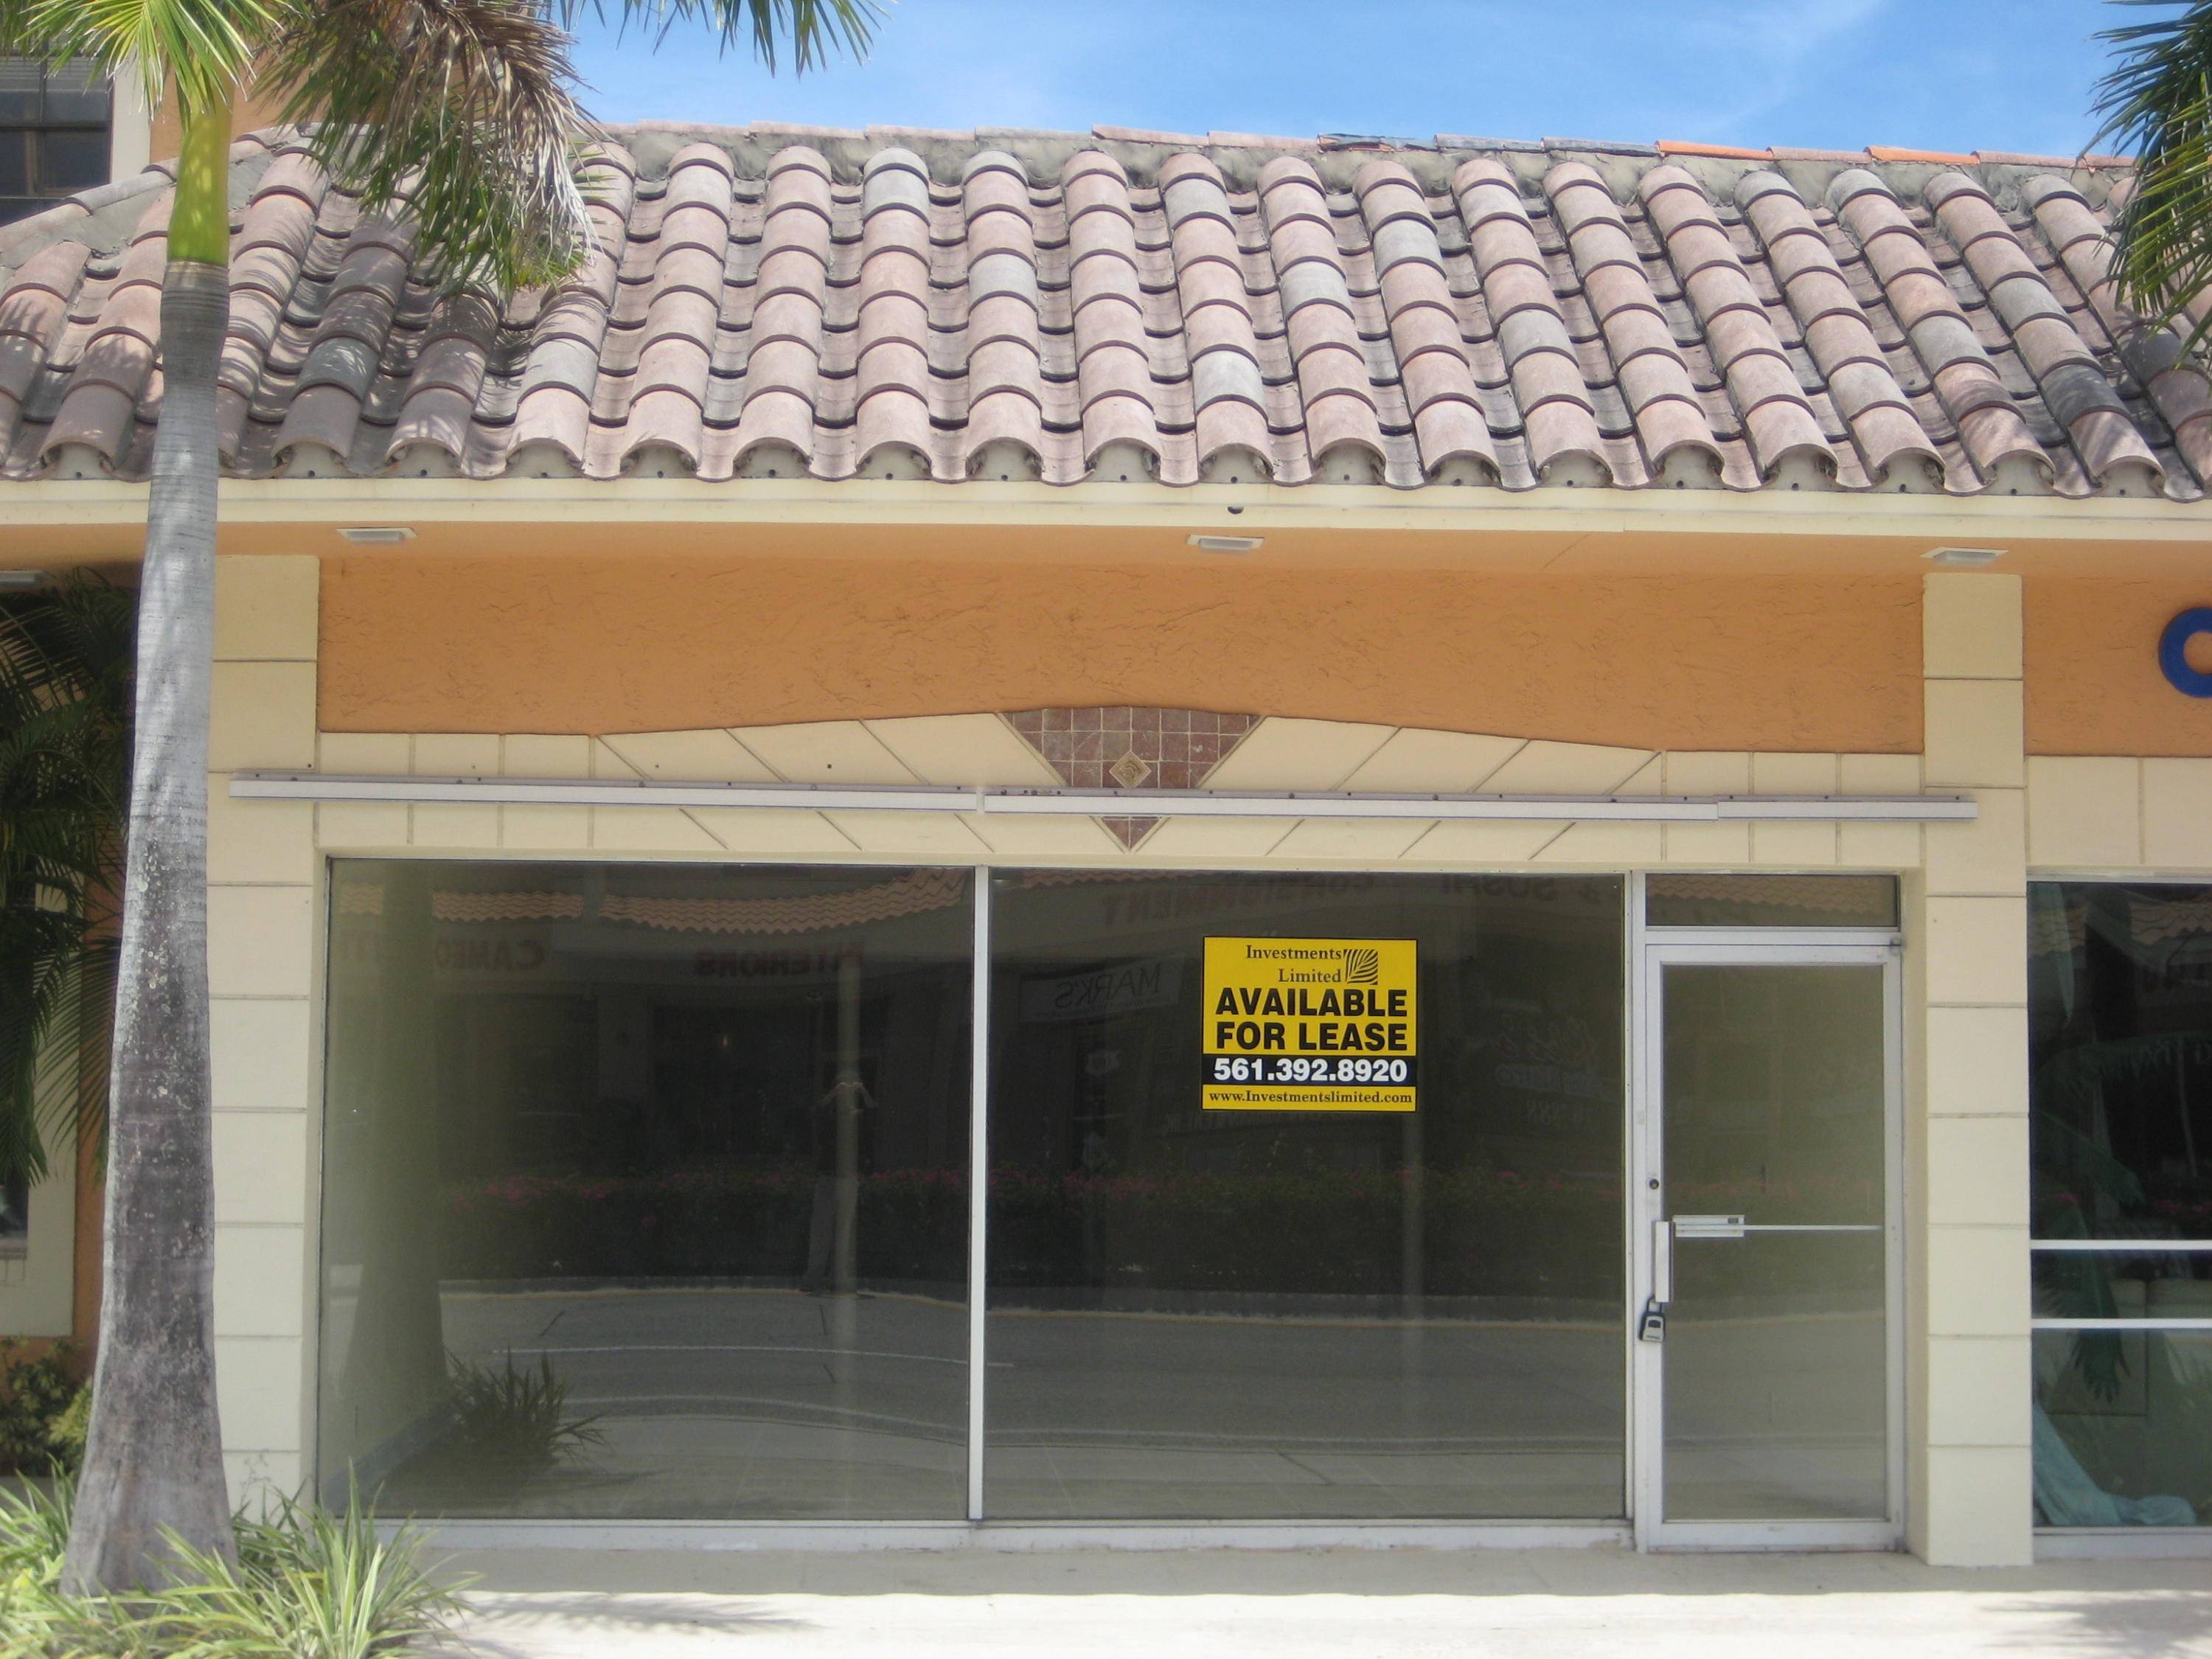 64 S Federal Highway Industrial Palm Beach